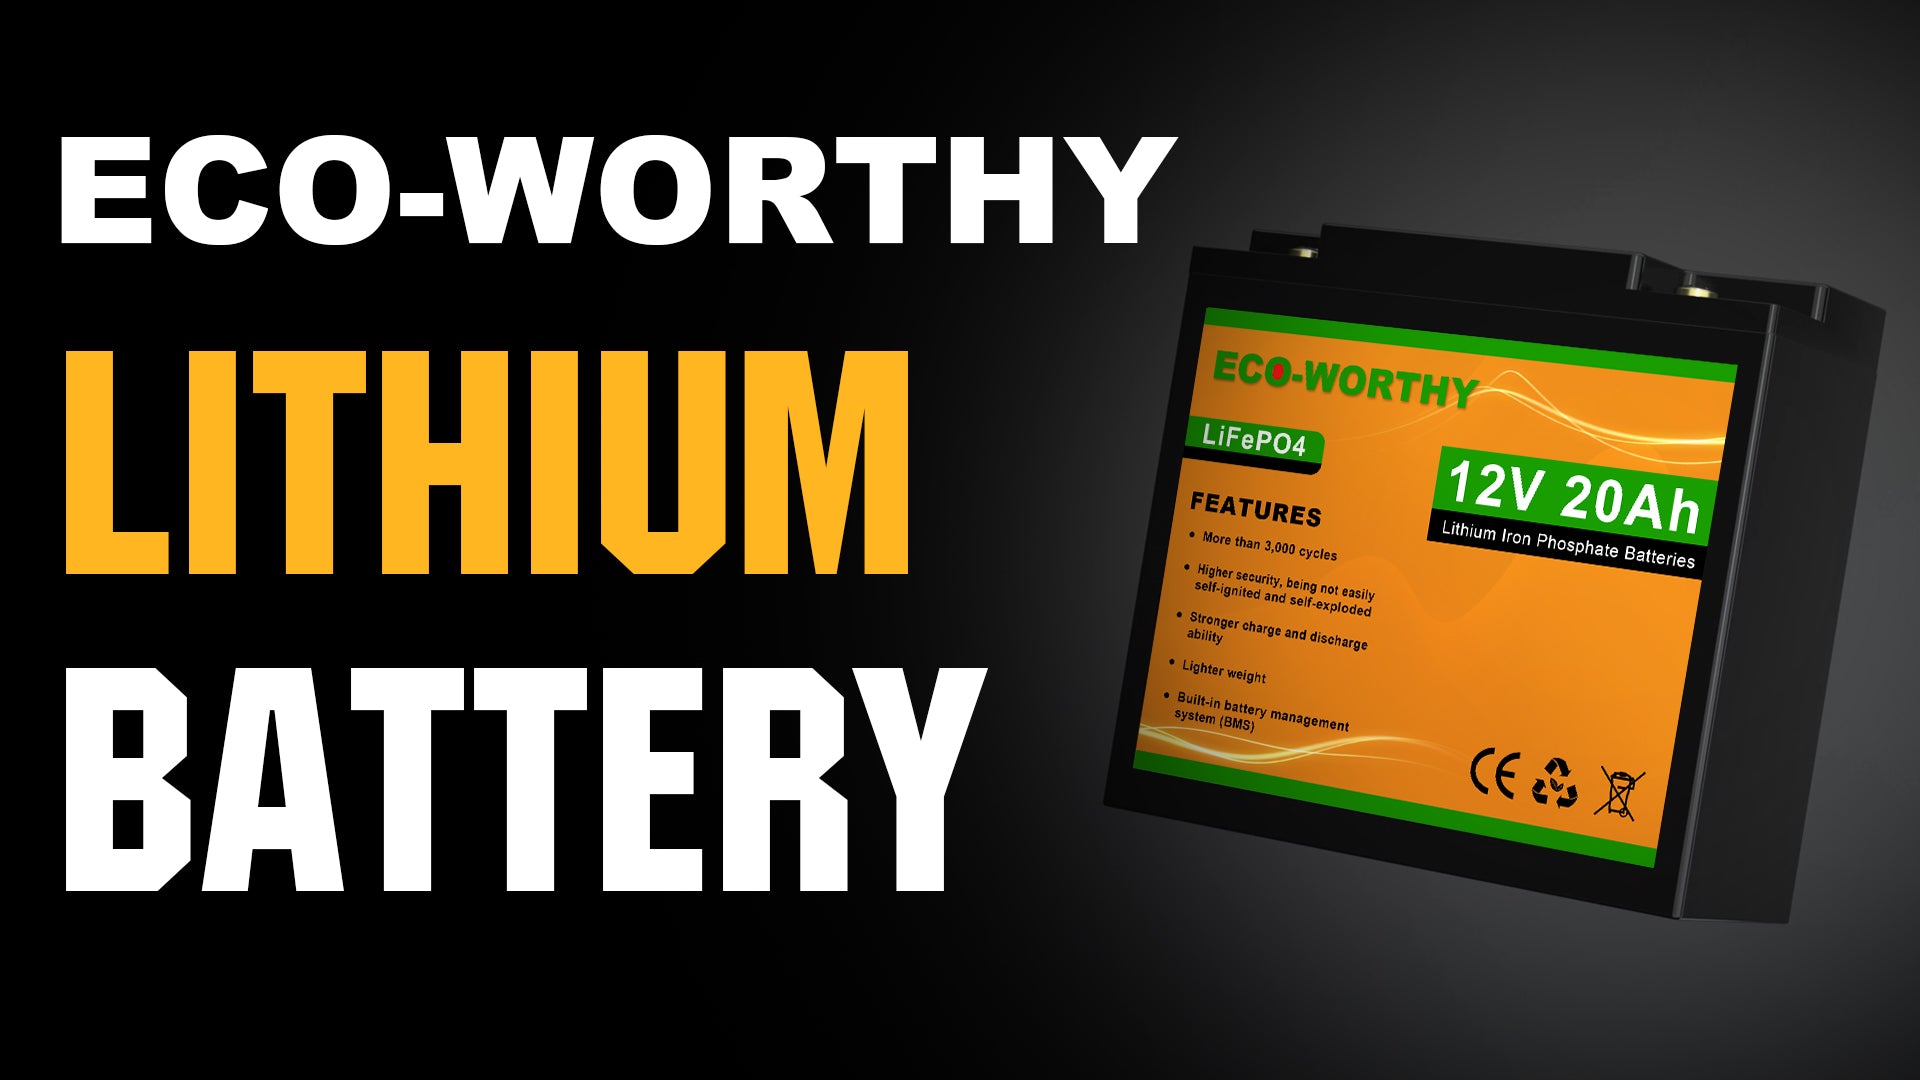 BATTERY COMPARISON ! why lithium/LiFePo4 battery beats Lead Acid/AGM battery?